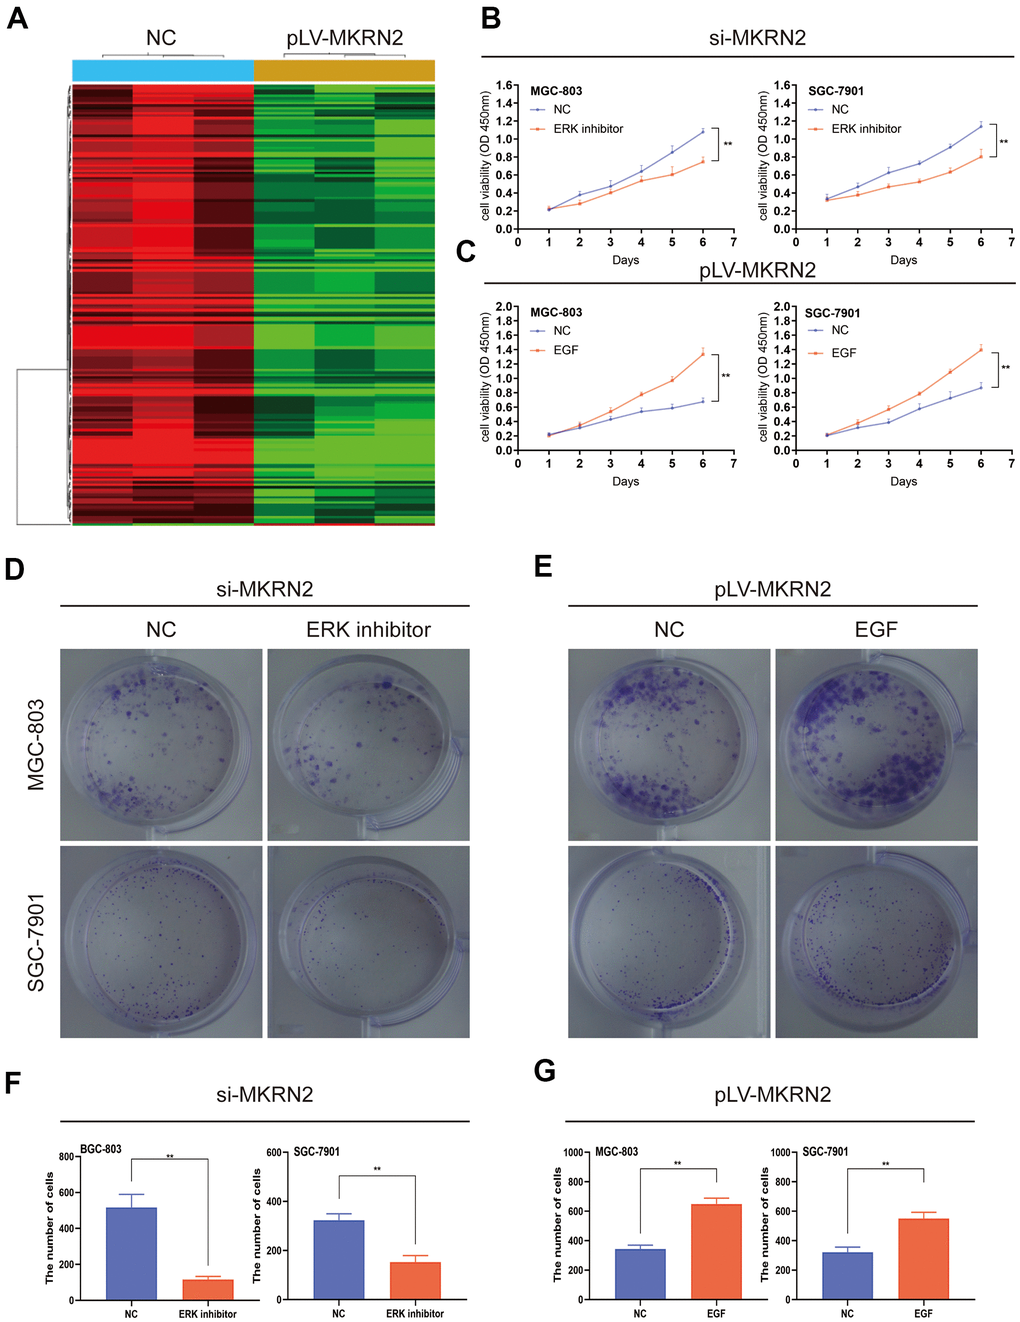 MKRN2 negatively regulates cell proliferation by inhibiting ERK. The result of RNA-seq analysis showed MKRN2 affects the ERK signaling pathway (A). When ERK activator in SGC-7901 and MGC-803 cells in which MKRN2 was overexpressed, it promoted cell proliferation (C, E, G). However, when used an ERK inhibitor in SGC-7901 and MGC-803 cells in which MKRN2 was inhibited, inhibition of cell proliferation was observed (B, D, F).